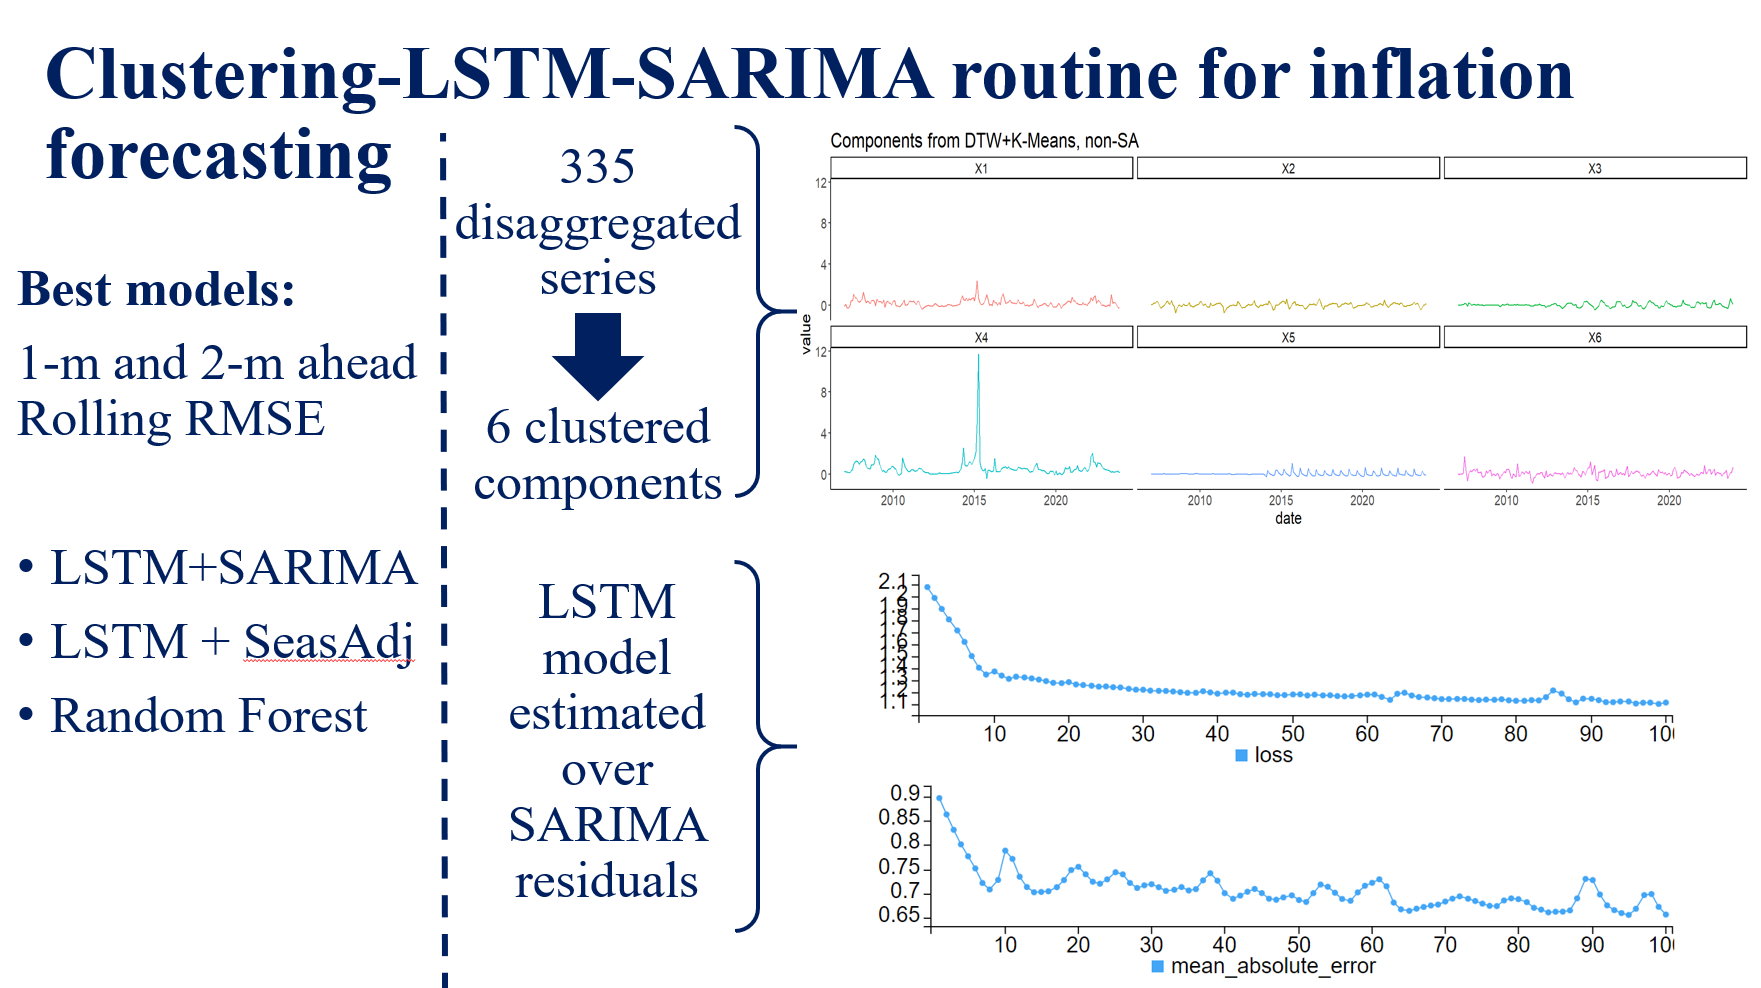 Exploring an LSTM-SARIMA routine for core inflation forecasting